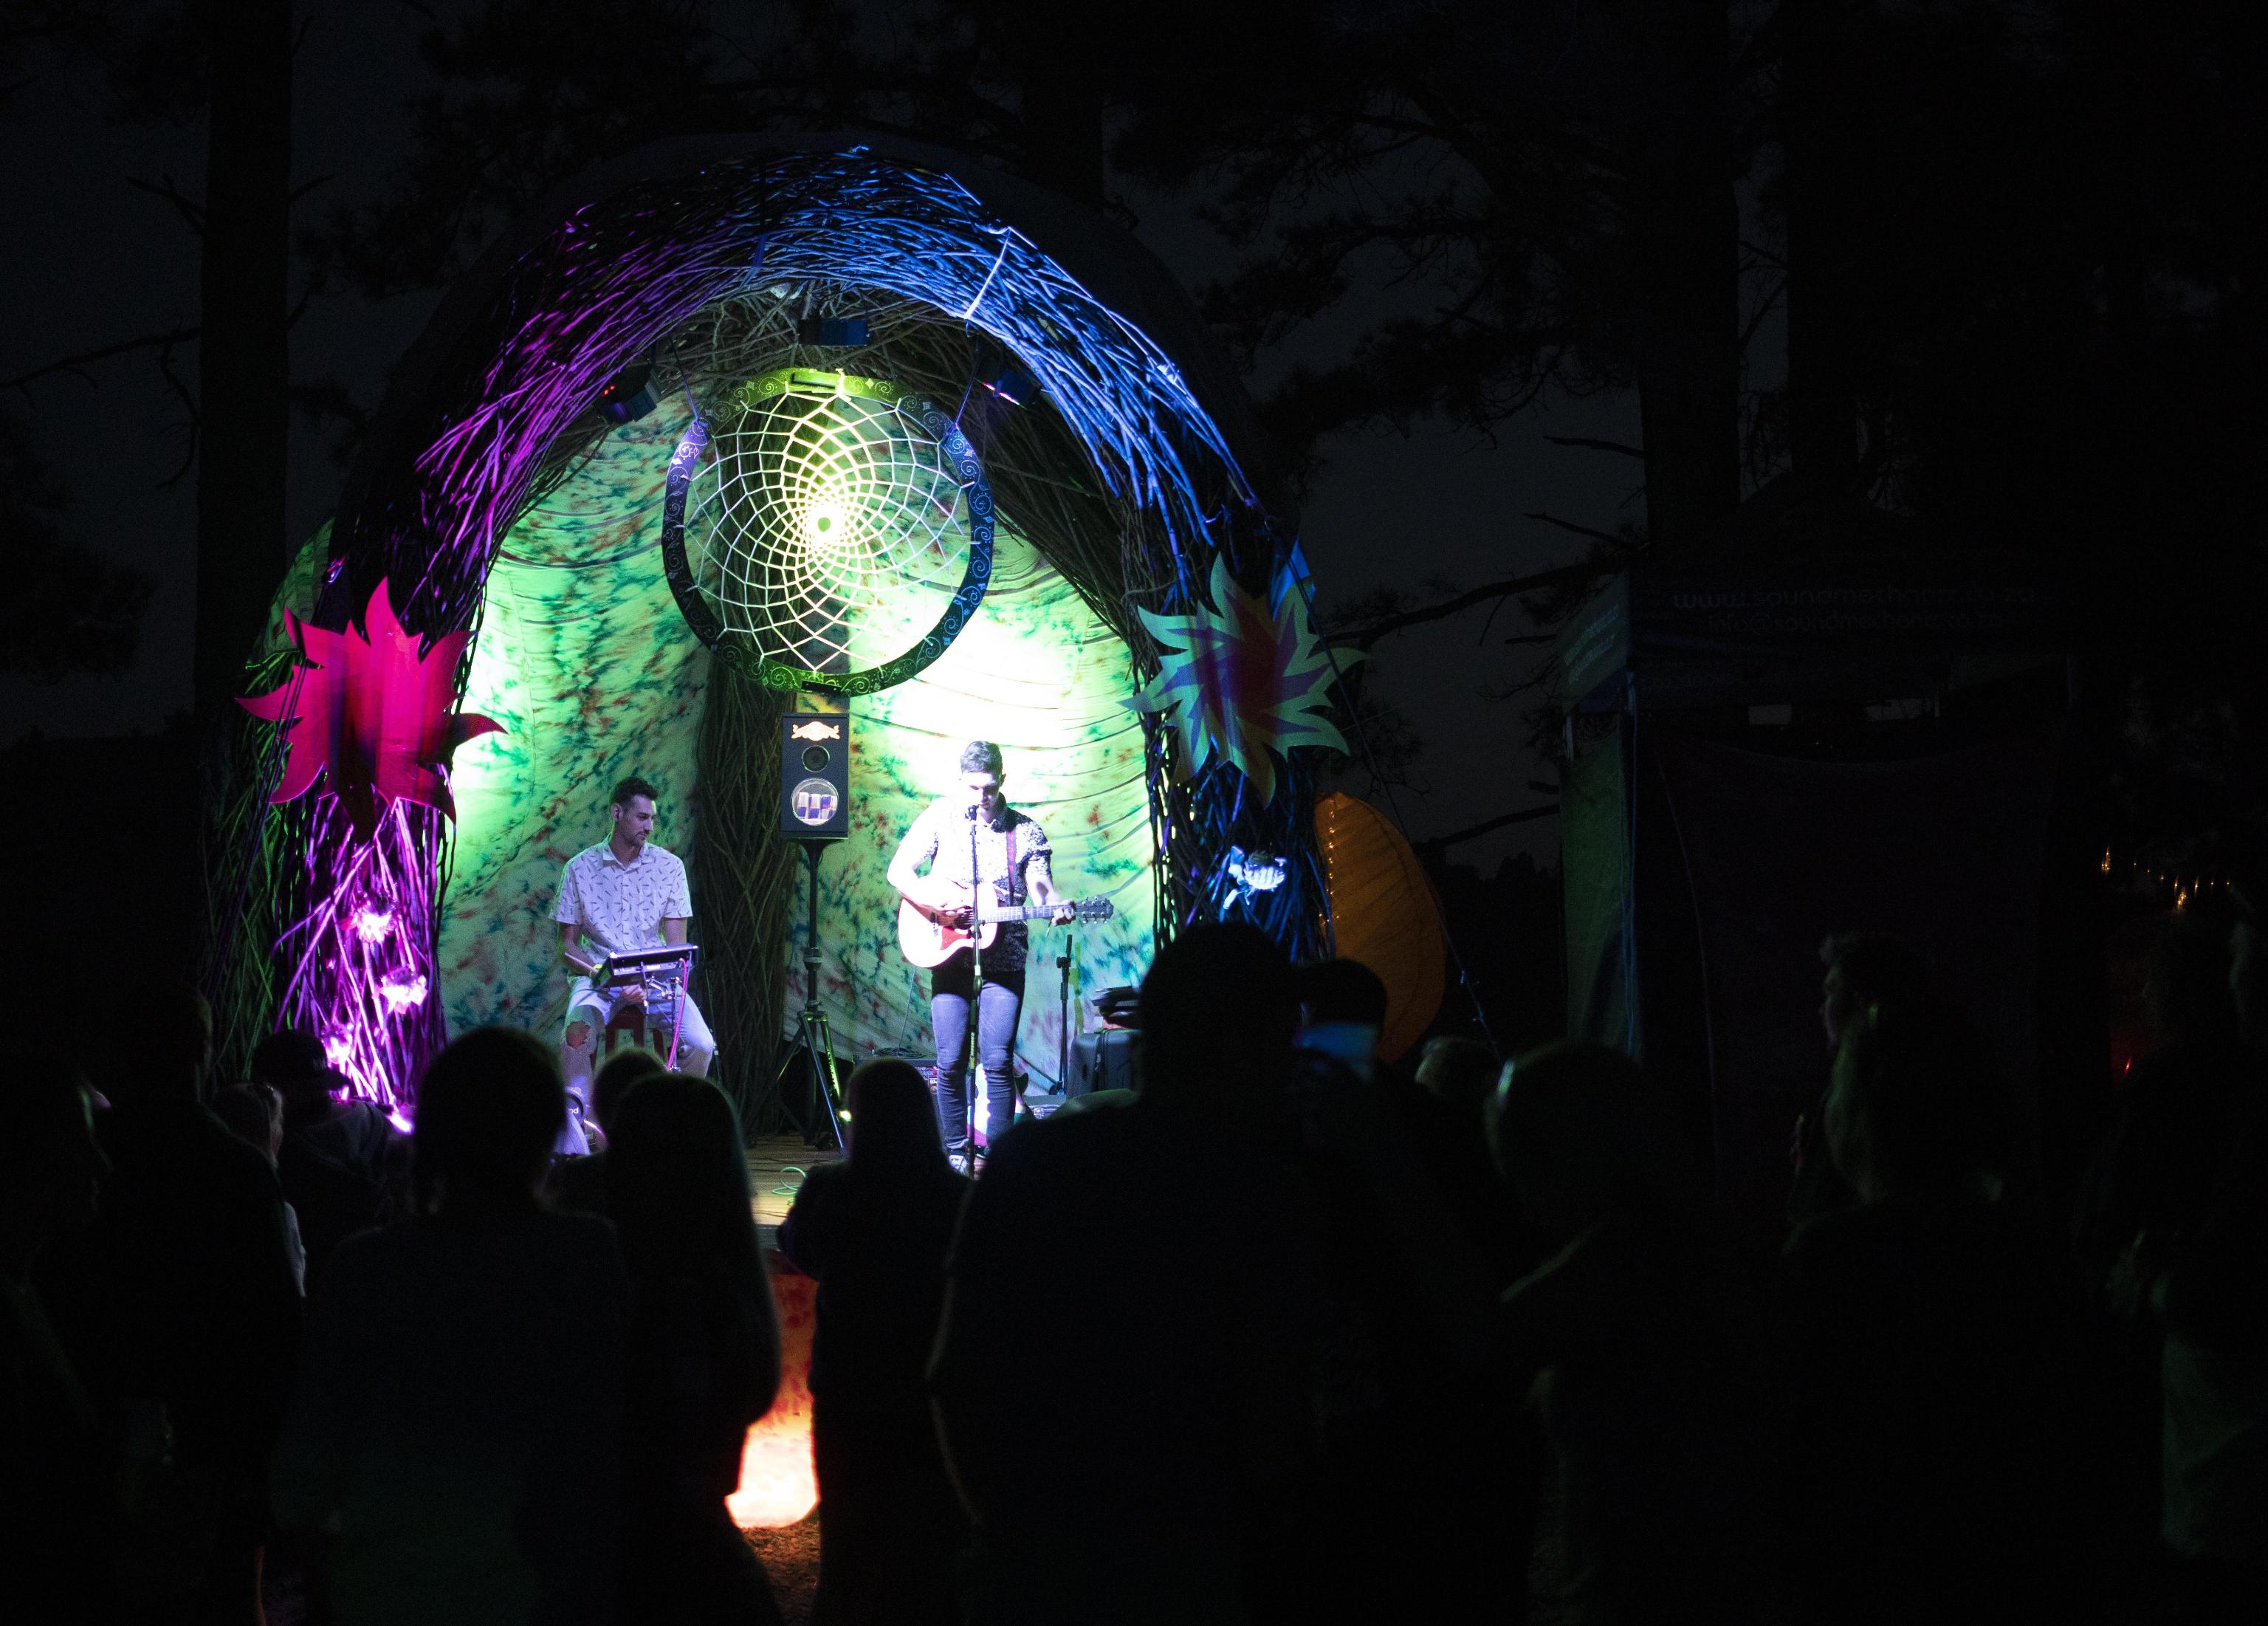 epa07517004 Artists perform at the 'Tree house Stage' during the annual Splashy Fen music festival, Underberg, South Africa, 19 April 2019 (issued 20 April 2019). The five day long festival is the oldest in the country and is celebrating its 30 year. The festival has four stages with various music styles, morning yoga sessions, artworks, trail running, holistic lifestyle events, stalls etc.  EPA/KIM LUDBROOK